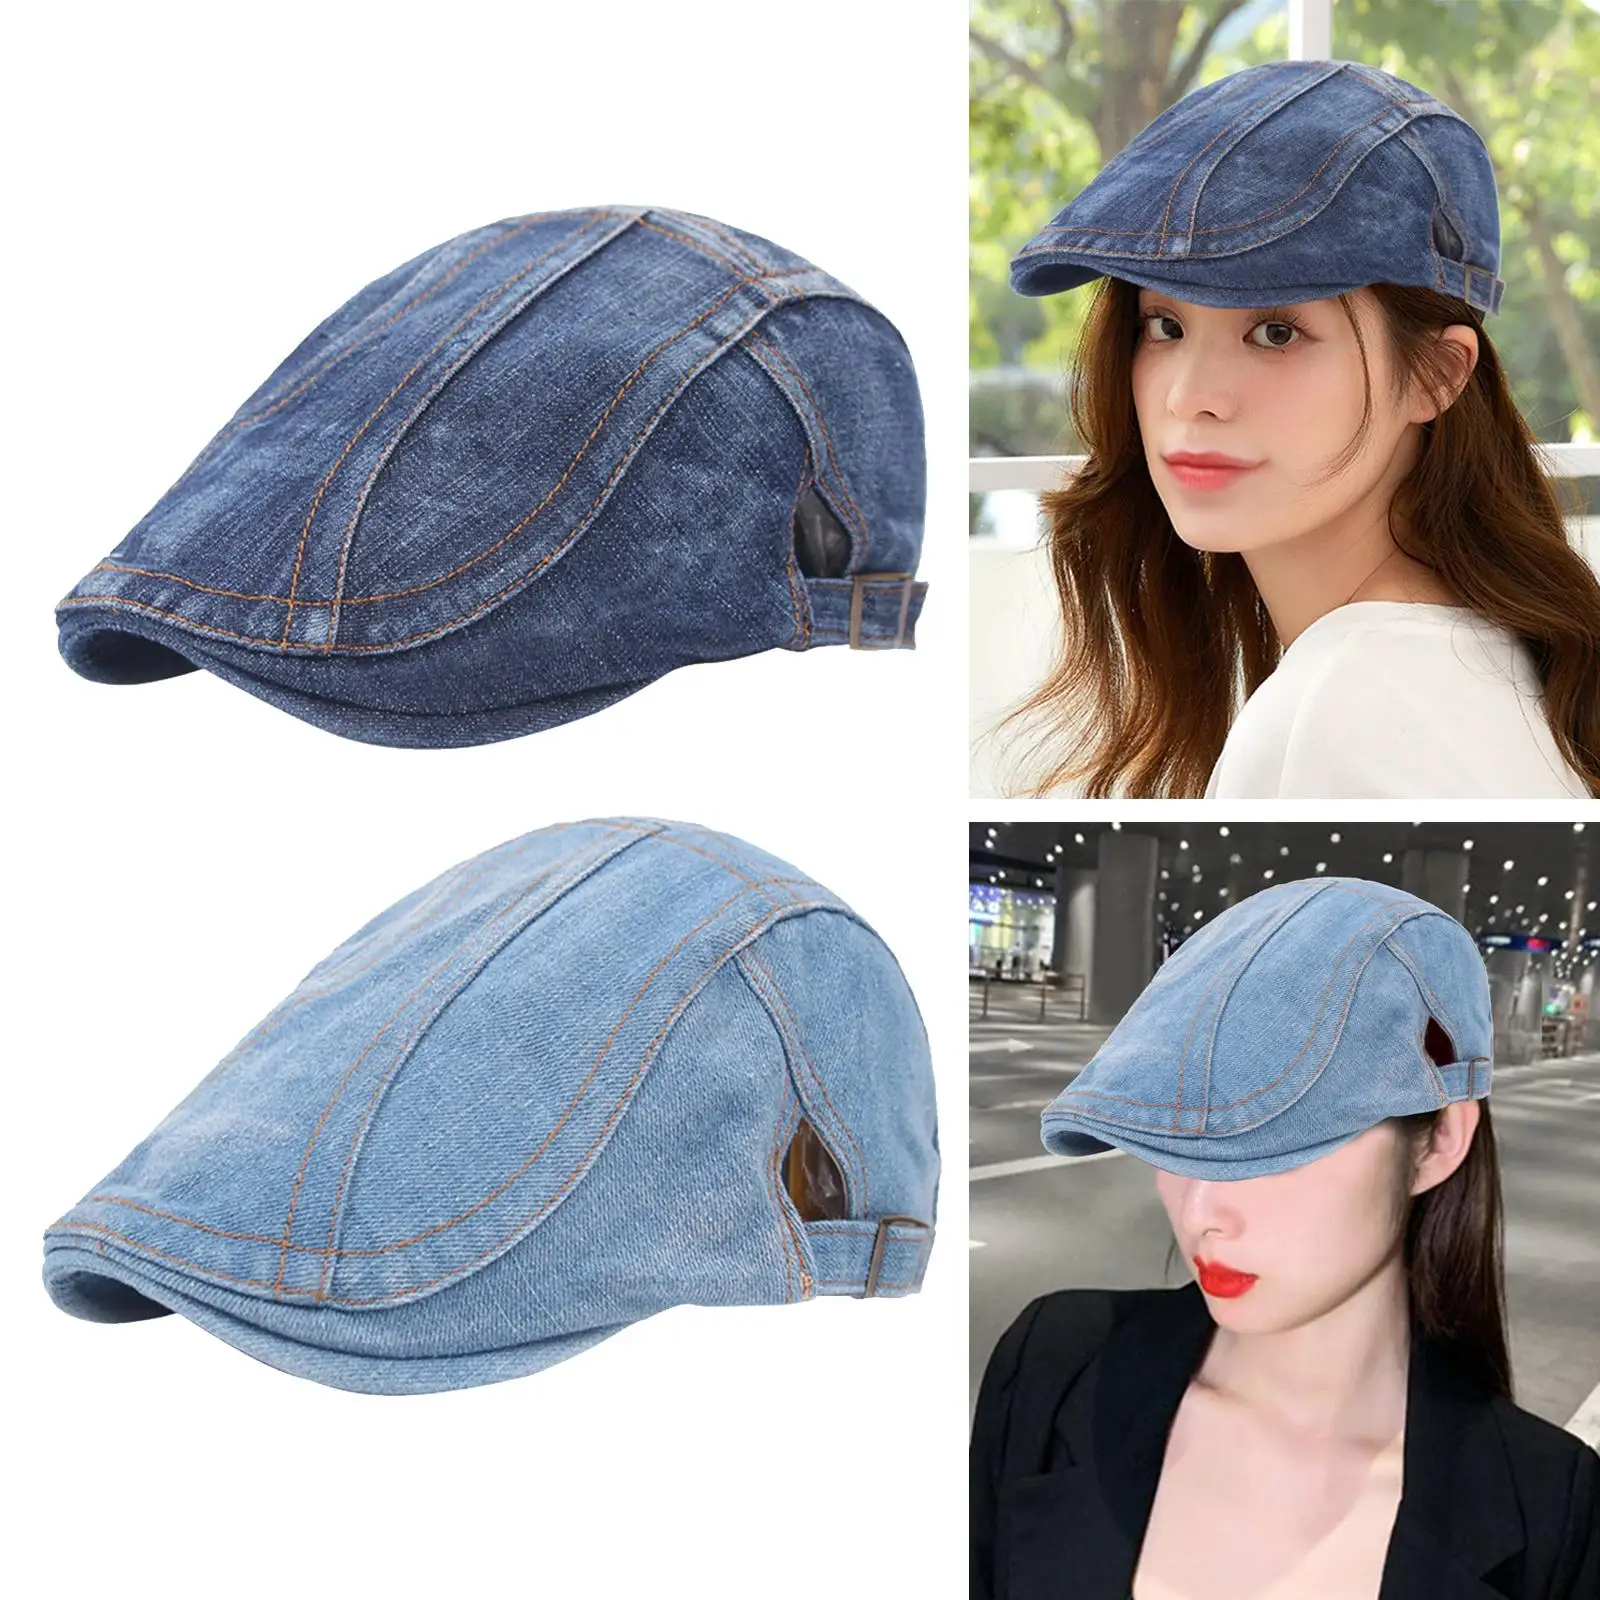 Unisex Newsboy Hat/ Flat Denim Hunting Ivy Snap Driving Cabbie Beret Caps/ for Men Women Washable Washed Jean/